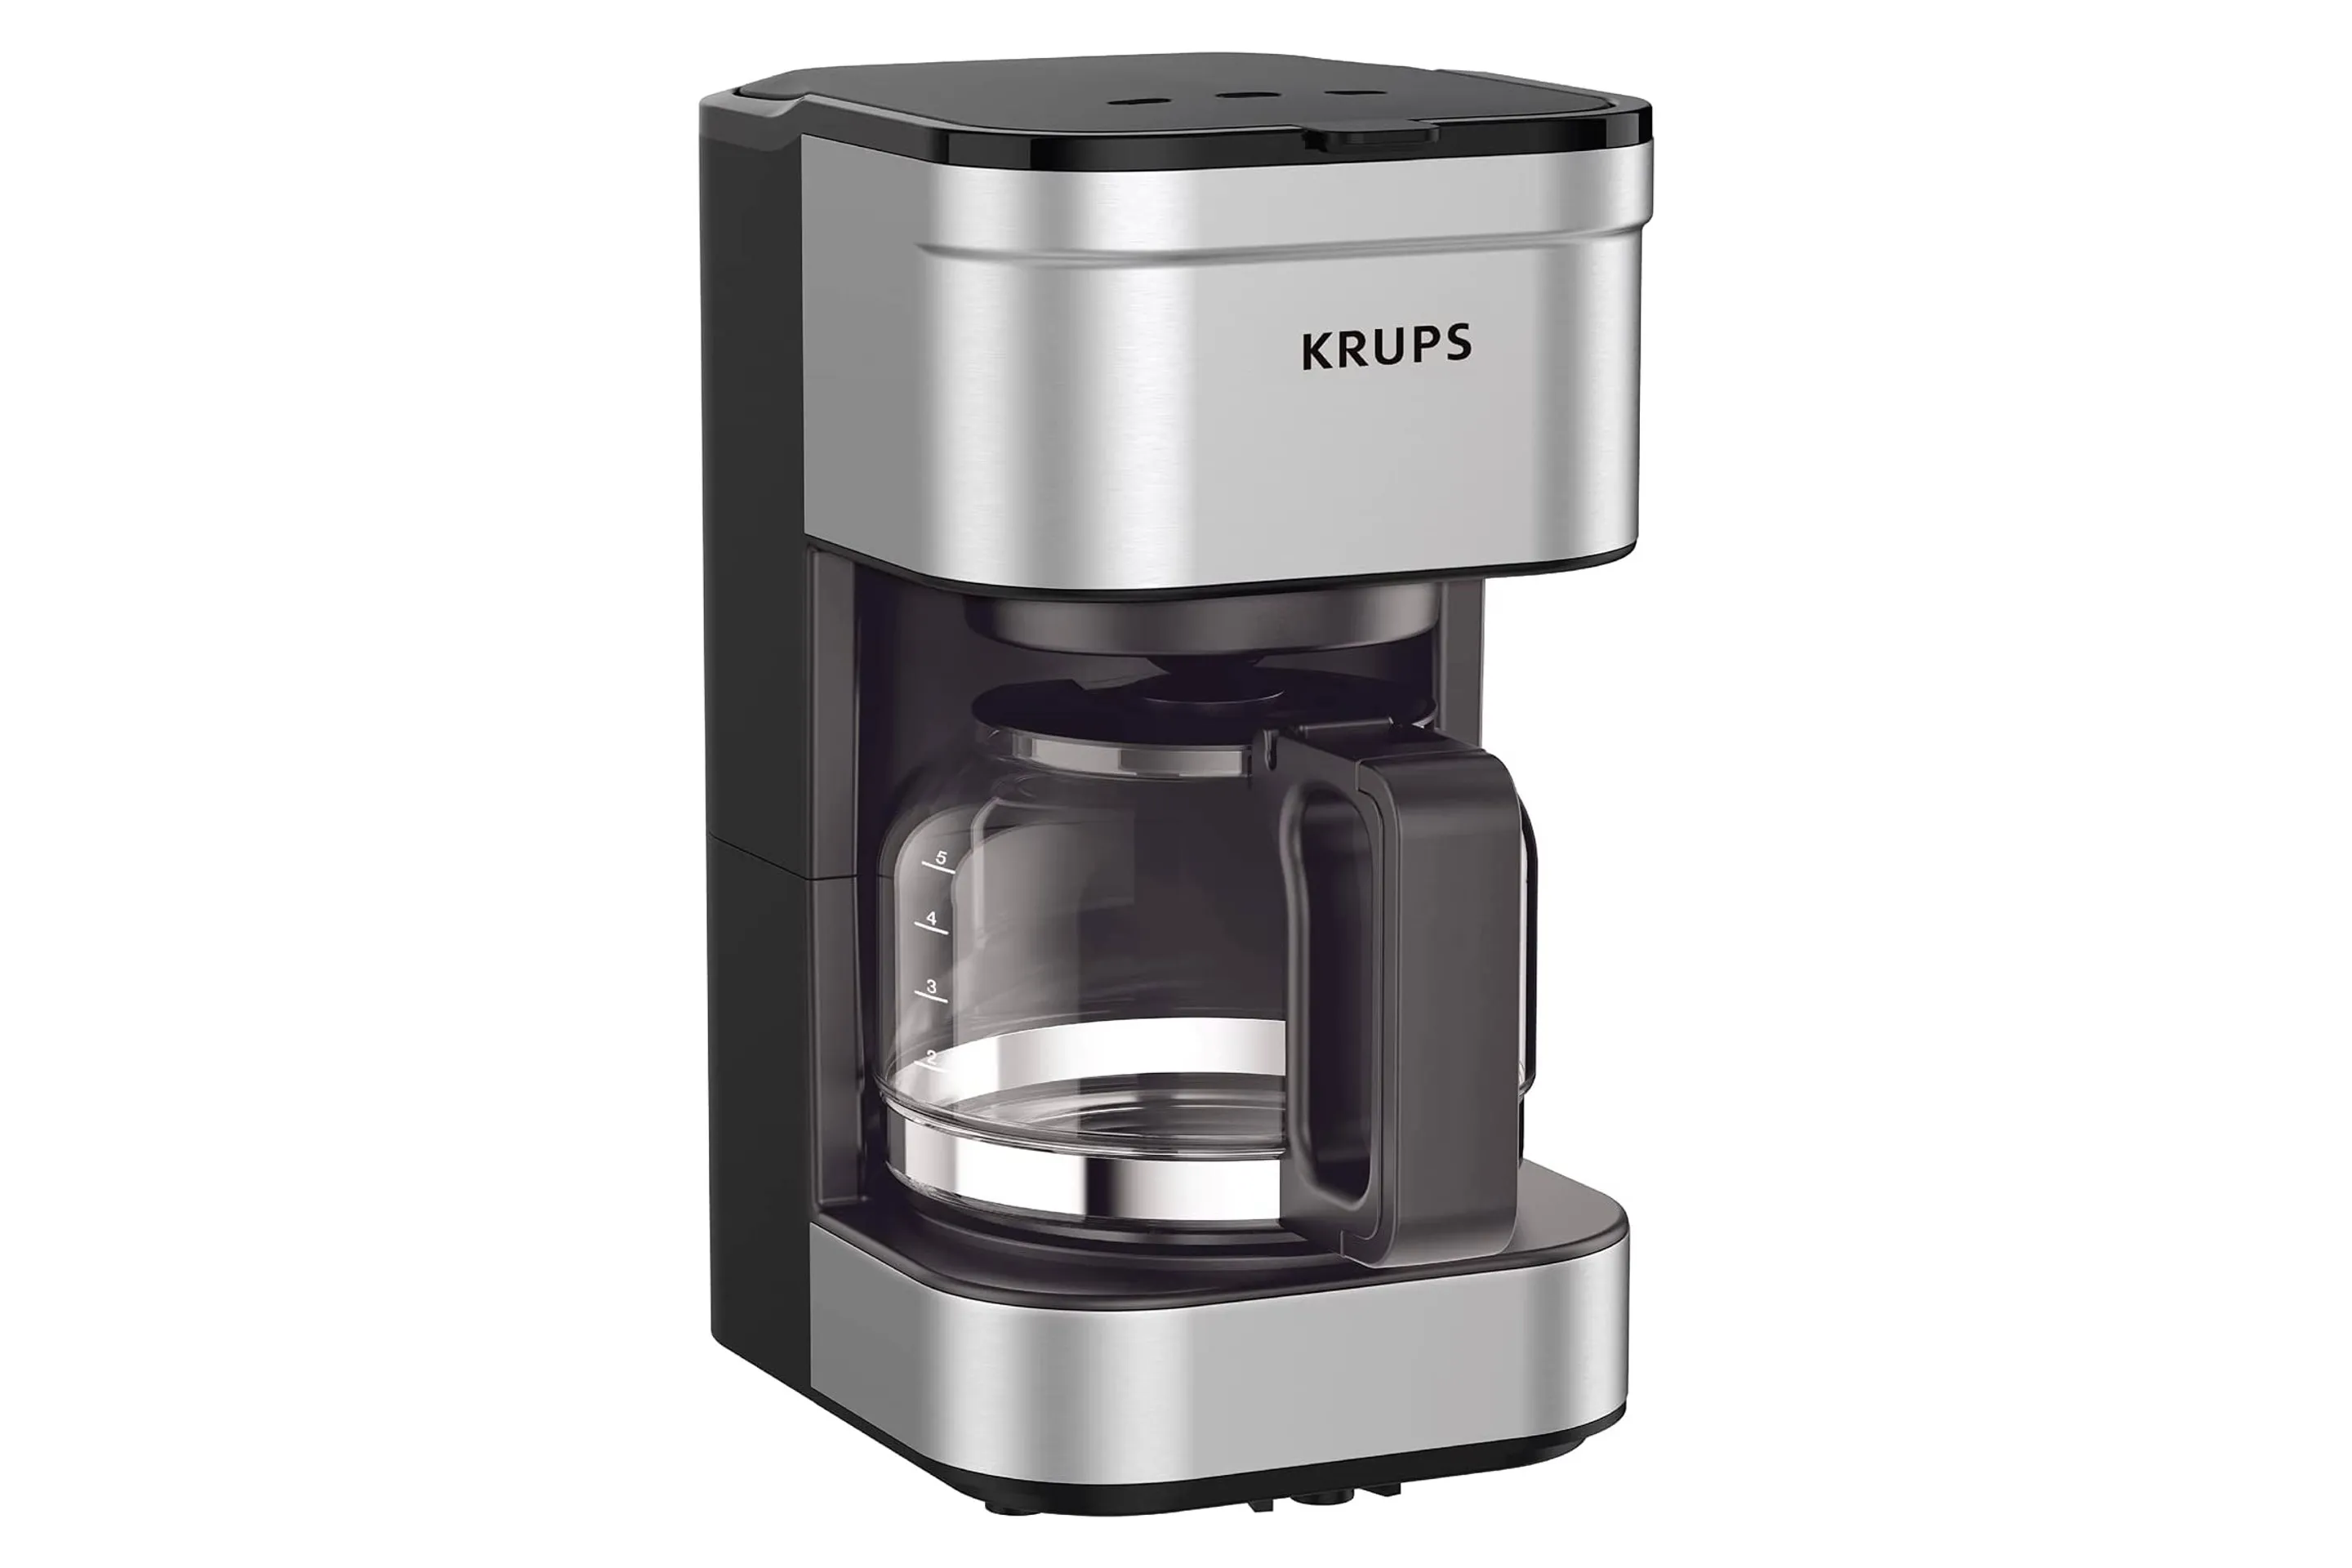 The Best Inexpensive Coffee Makers 